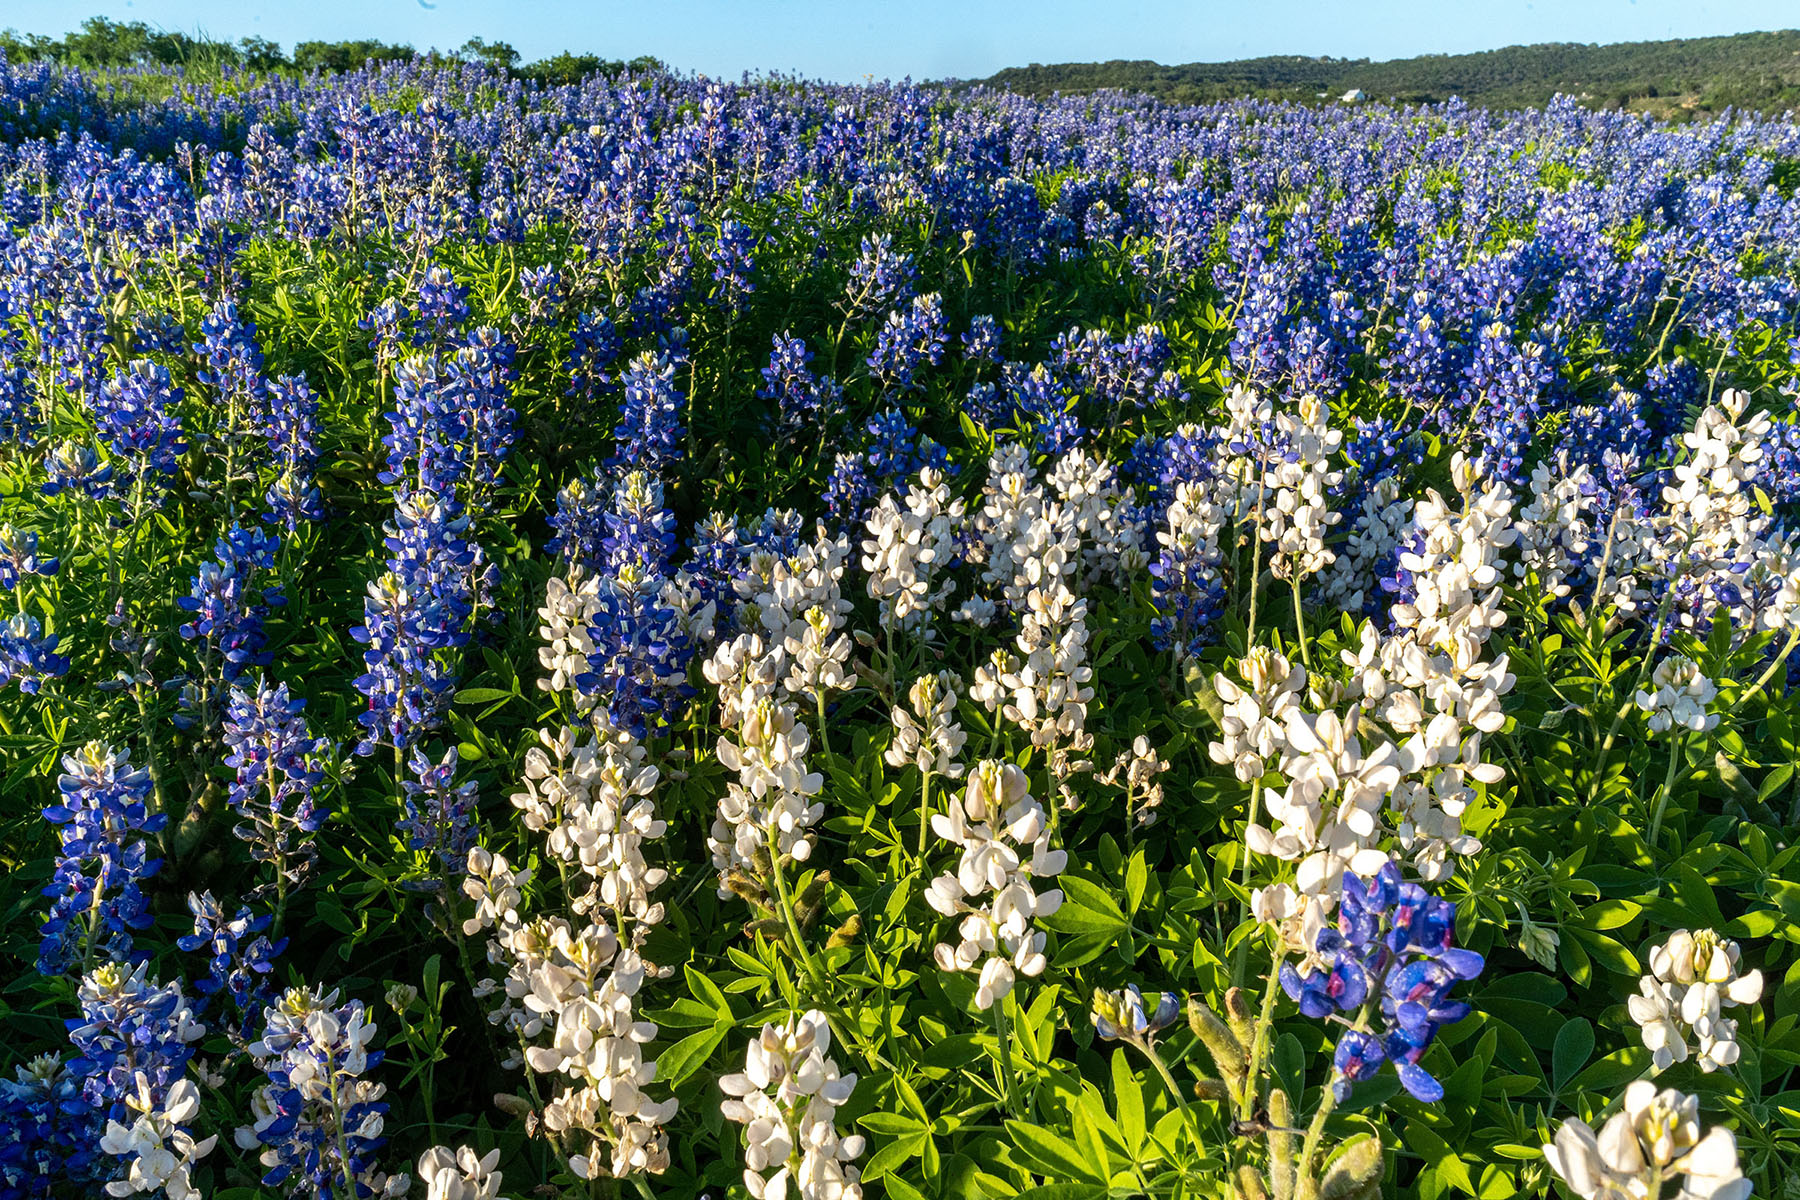 A field of bluebonnets in brilliant blue and white under blue sky